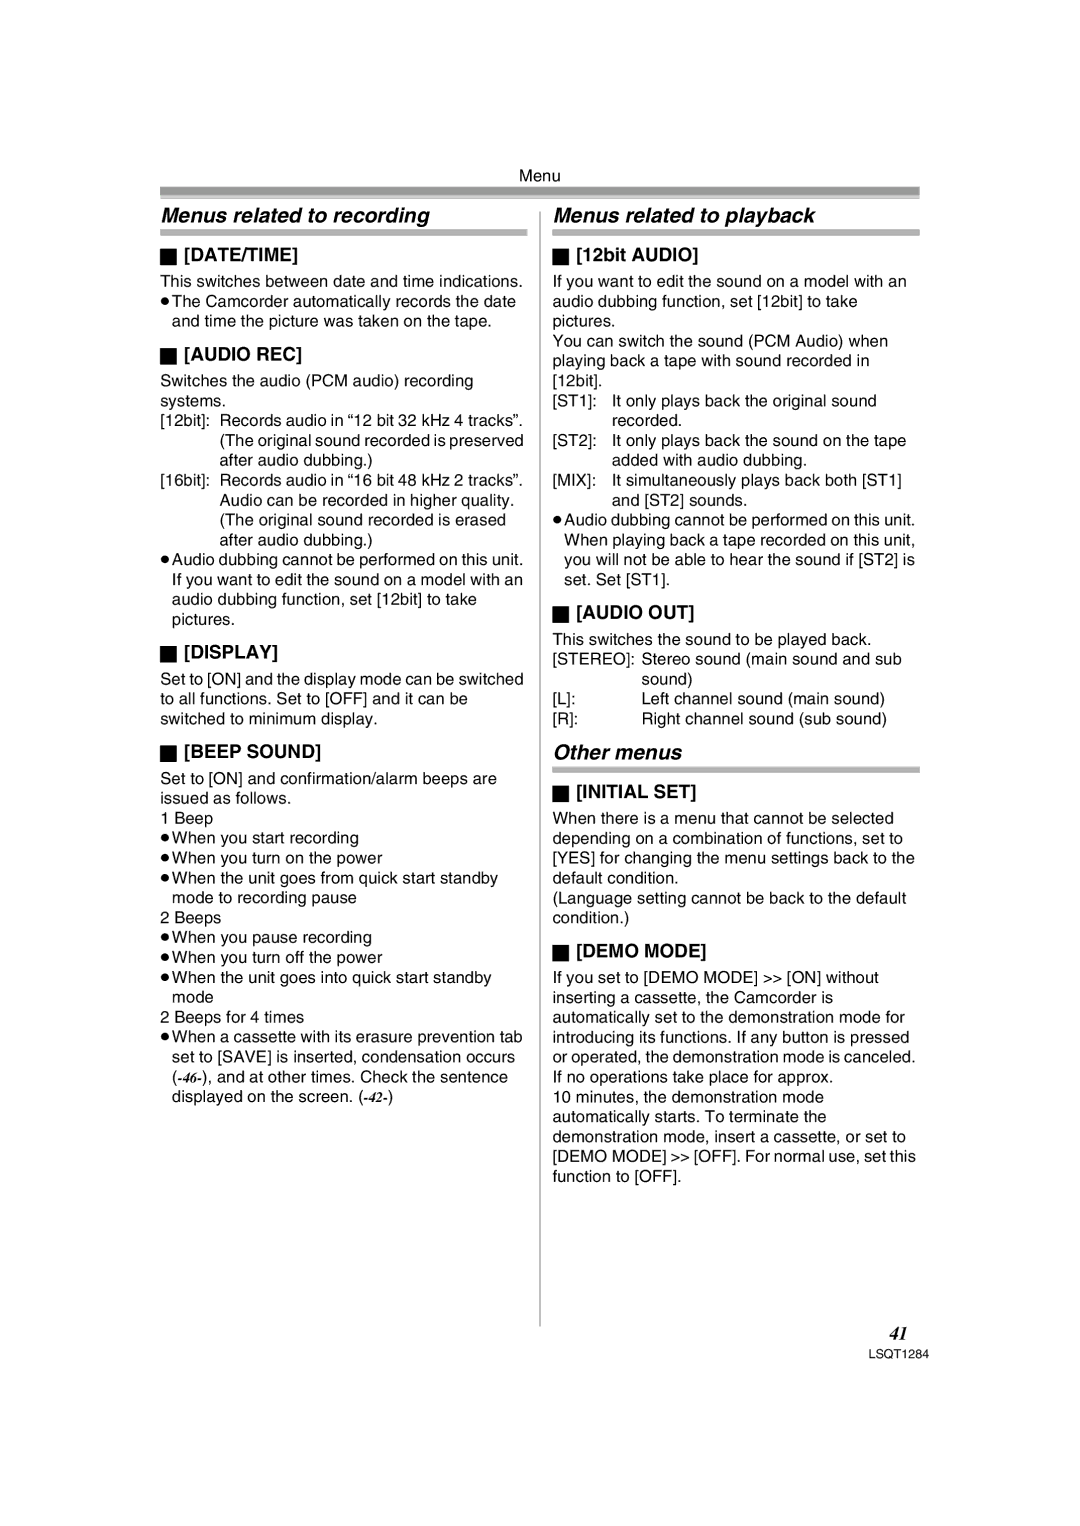 Panasonic PVGS90P, PV-GS90PL-S operating instructions Menus related to recording, Menus related to playback, Other menus 